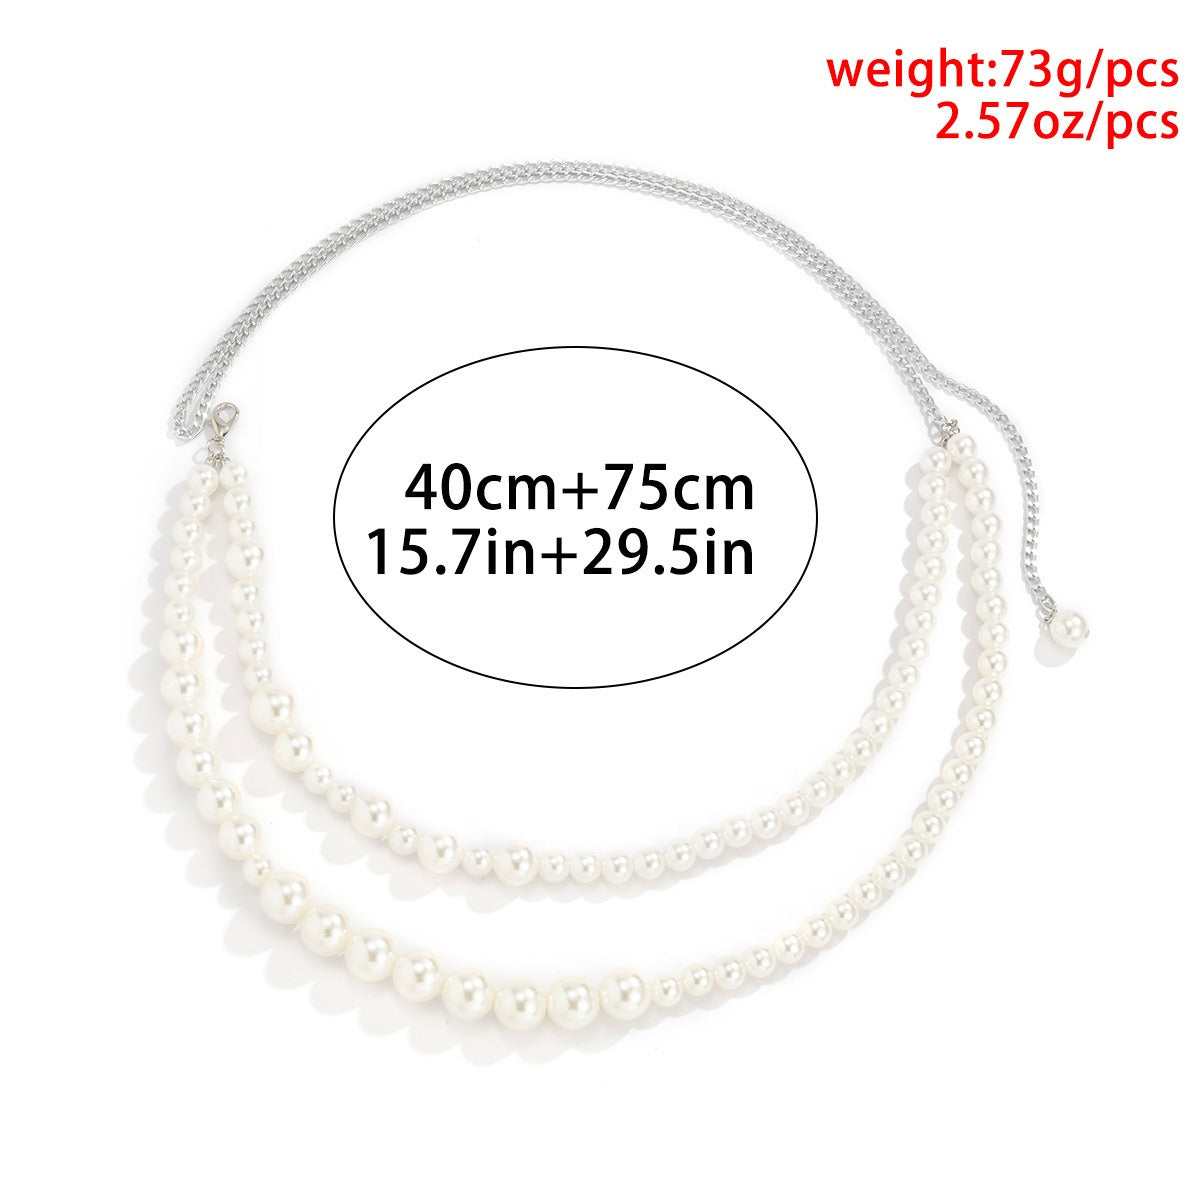 Minimalist Multi-layer Imitation Chain with Pearl Sized Bead for Body, Waist and Chest